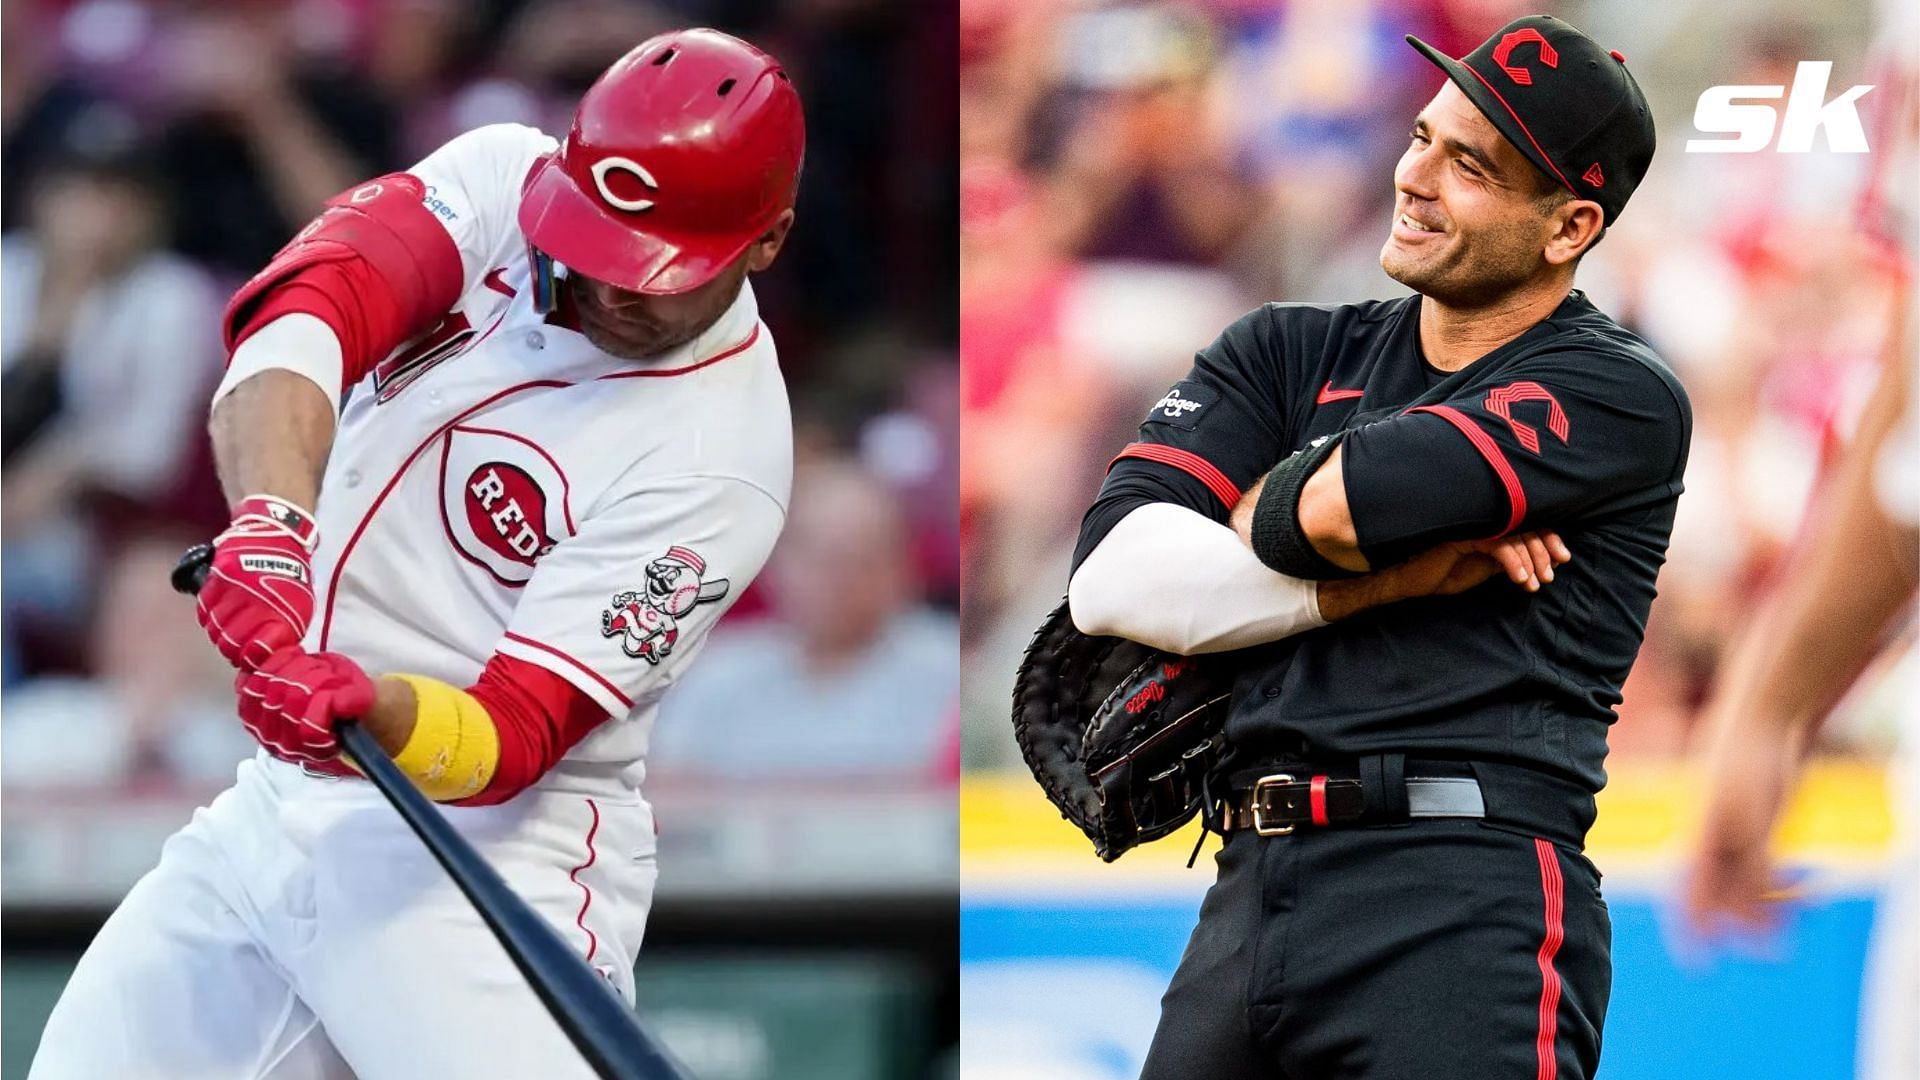 Cincinnati Reds icon Joey Votto is at peace as his potential final homestand approaches